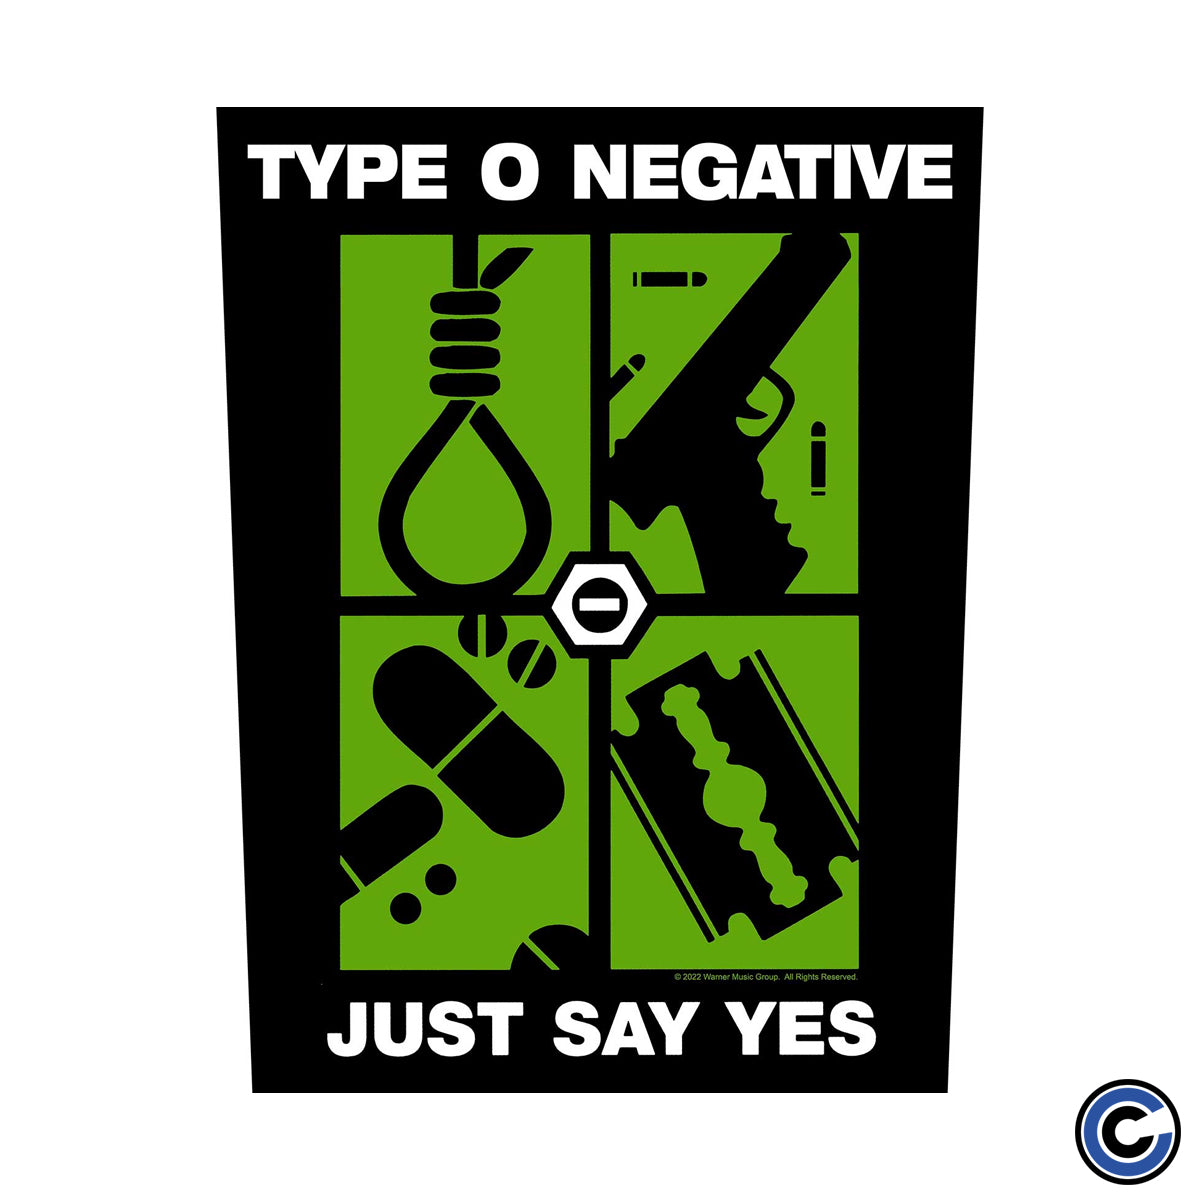 Type O Negative "Just Say Yes" Back Patch